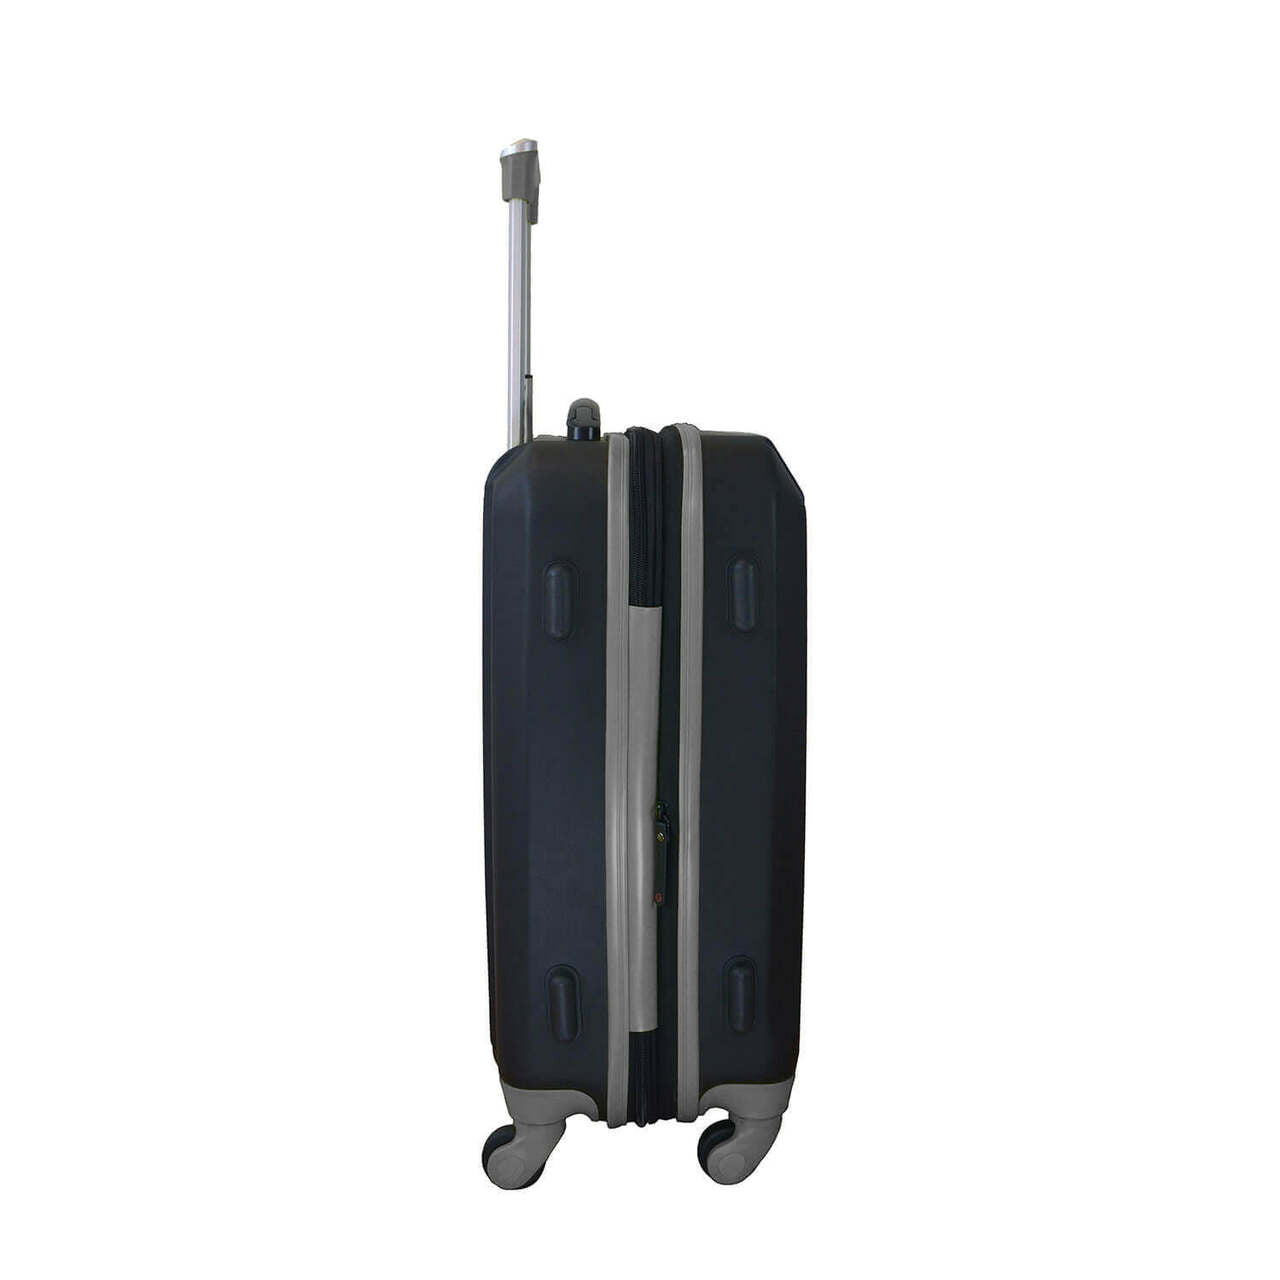 Golden Knights Carry On Spinner Luggage | Vegas Golden Knights Hardcase Two-Tone Luggage Carry-on Spinner in Black